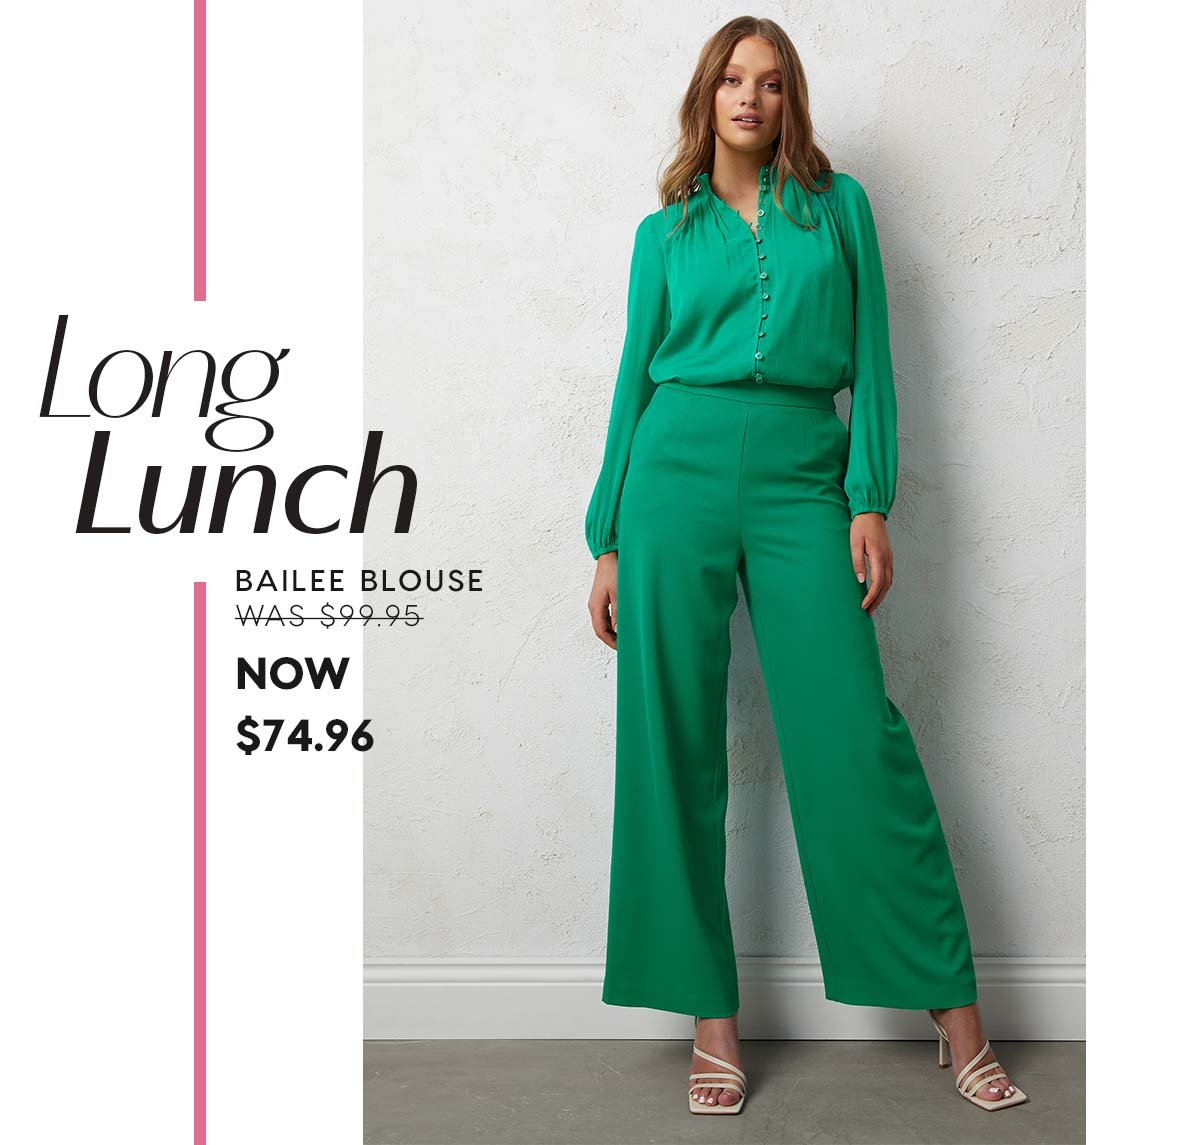 Long Lunch. Bailee Blouse WAS $99.95 NOW  $74.96